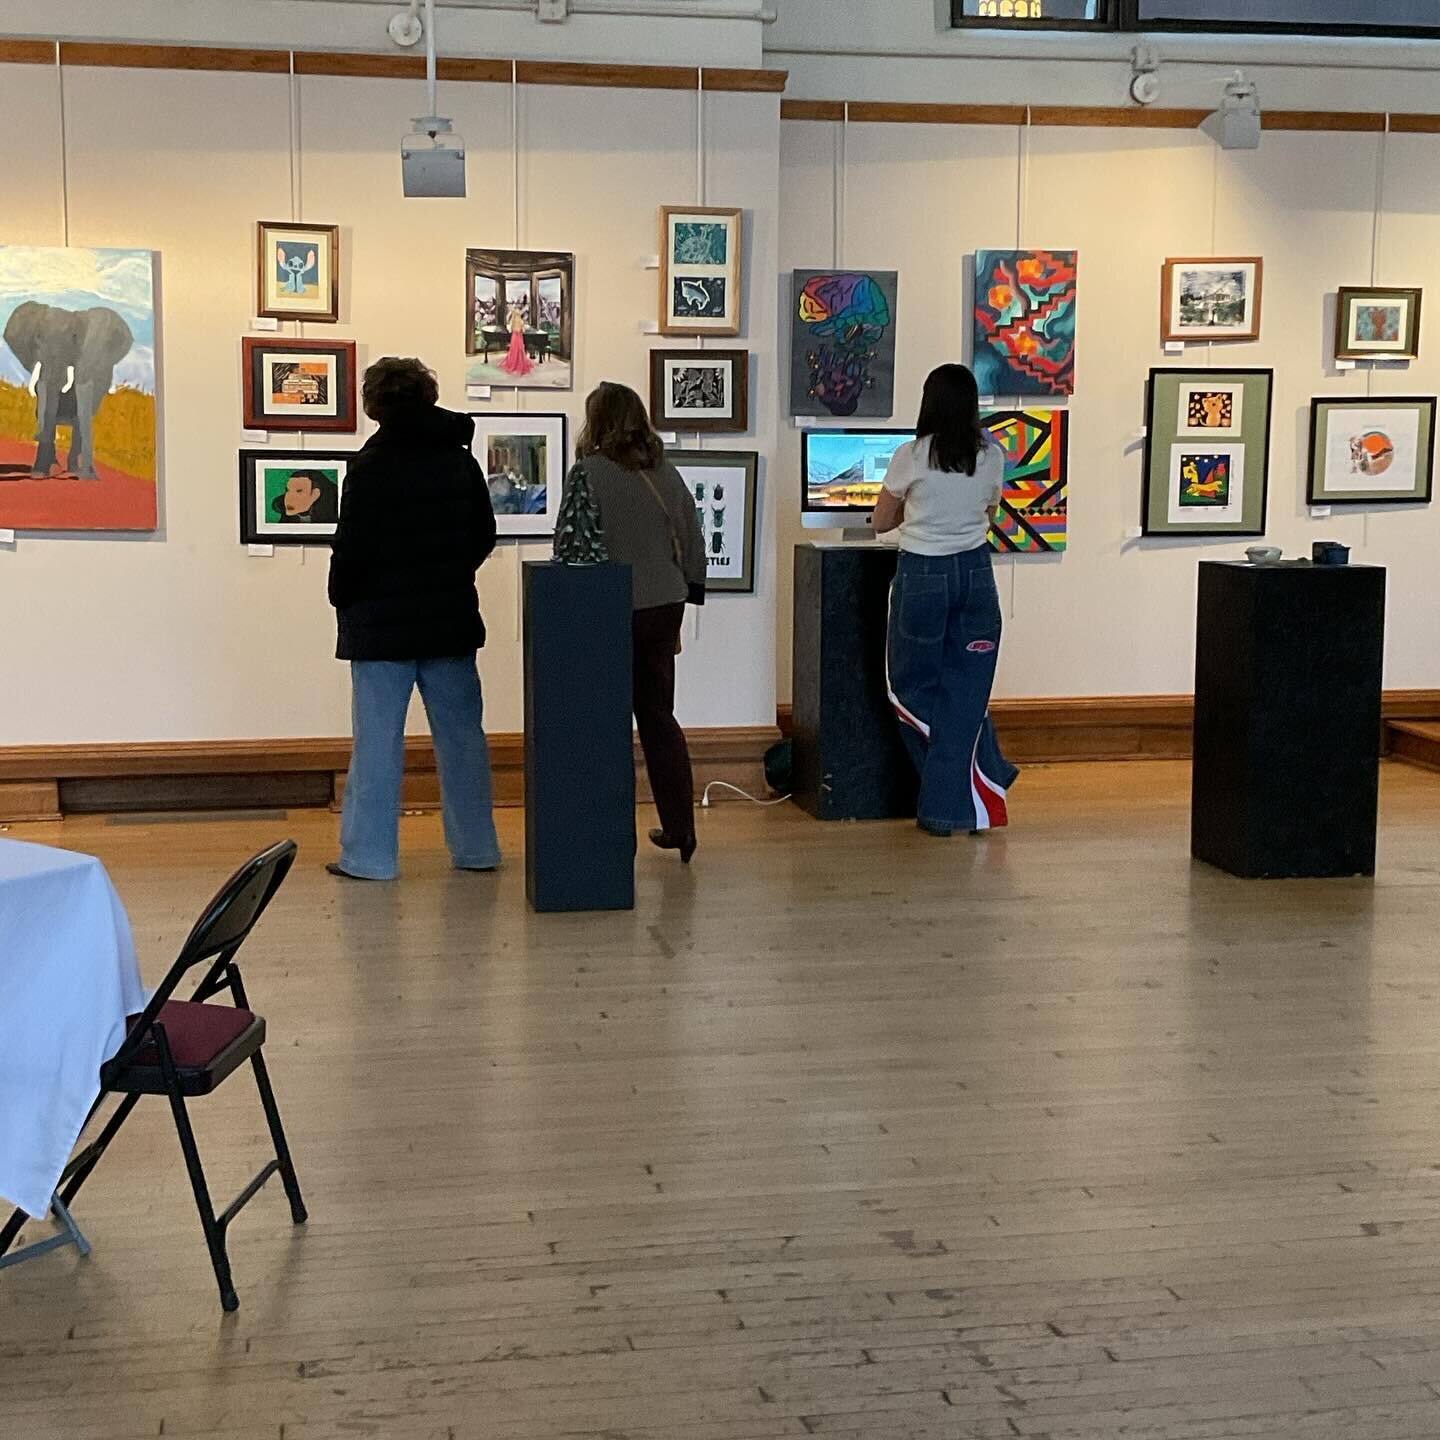 Reception nights are wonderful for gathering! Thank you Kevin Woocock for presenting your art in our Maxwell Gallery and for organizing your DnE art students work.